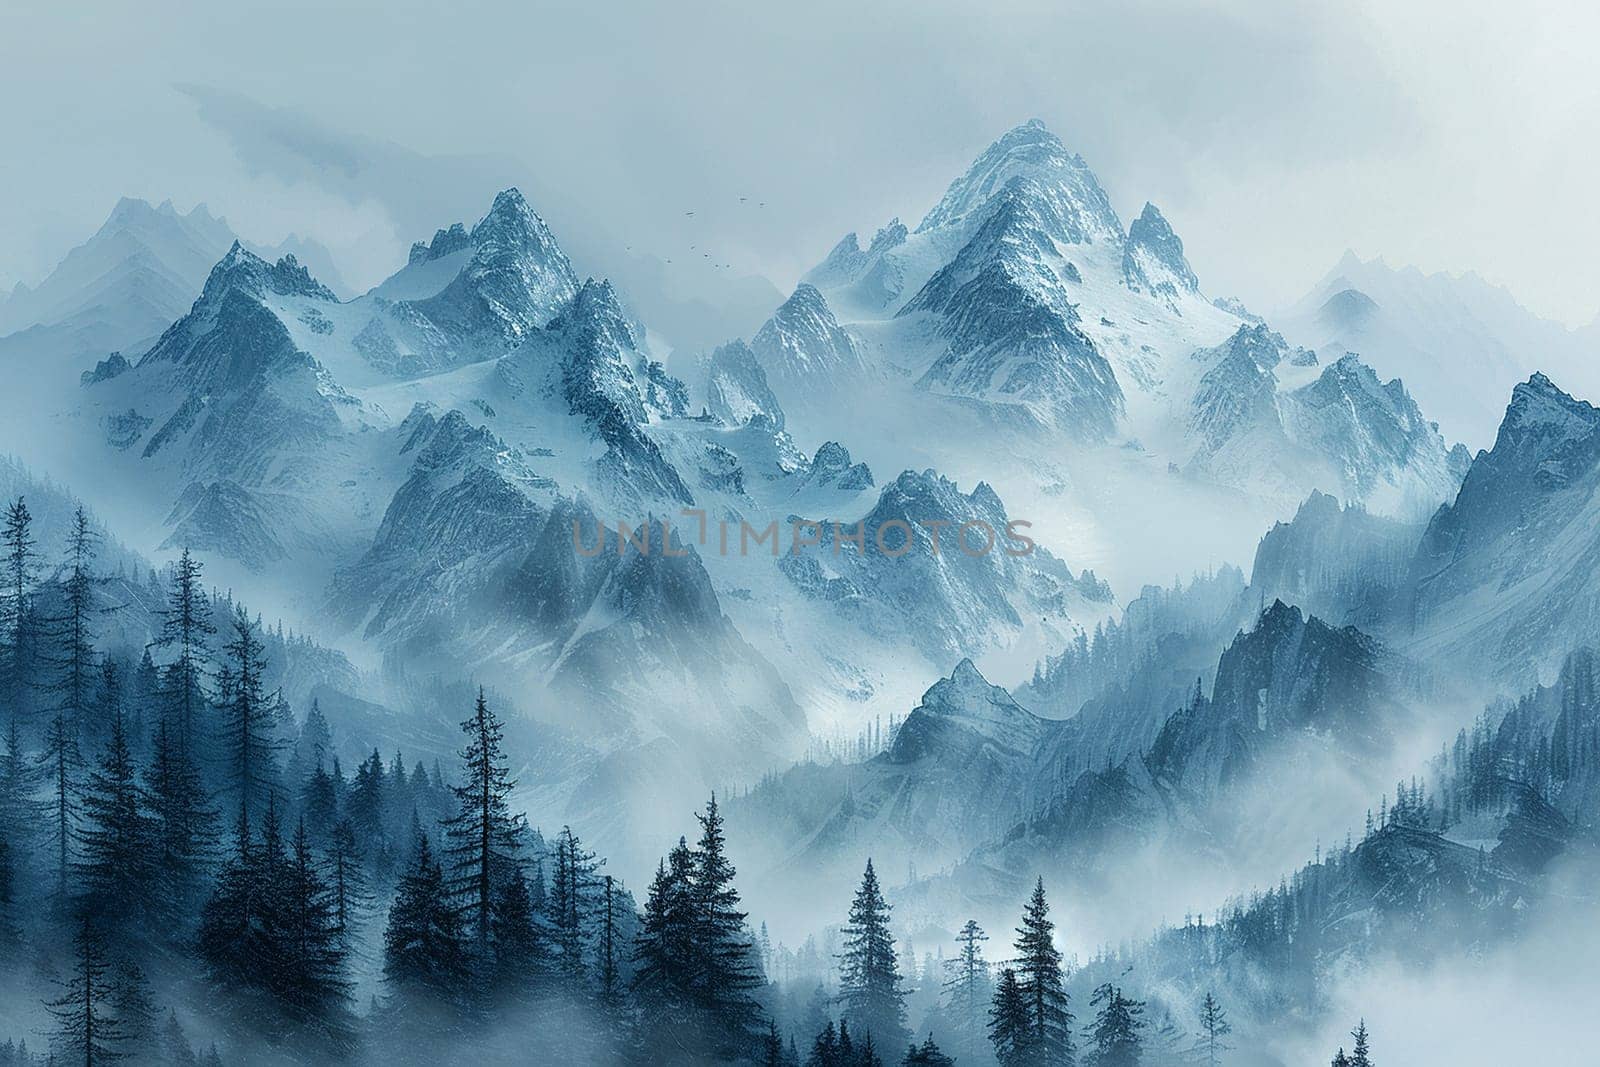 Misty mountain range at dawn, ideal for tranquil and majestic background themes.